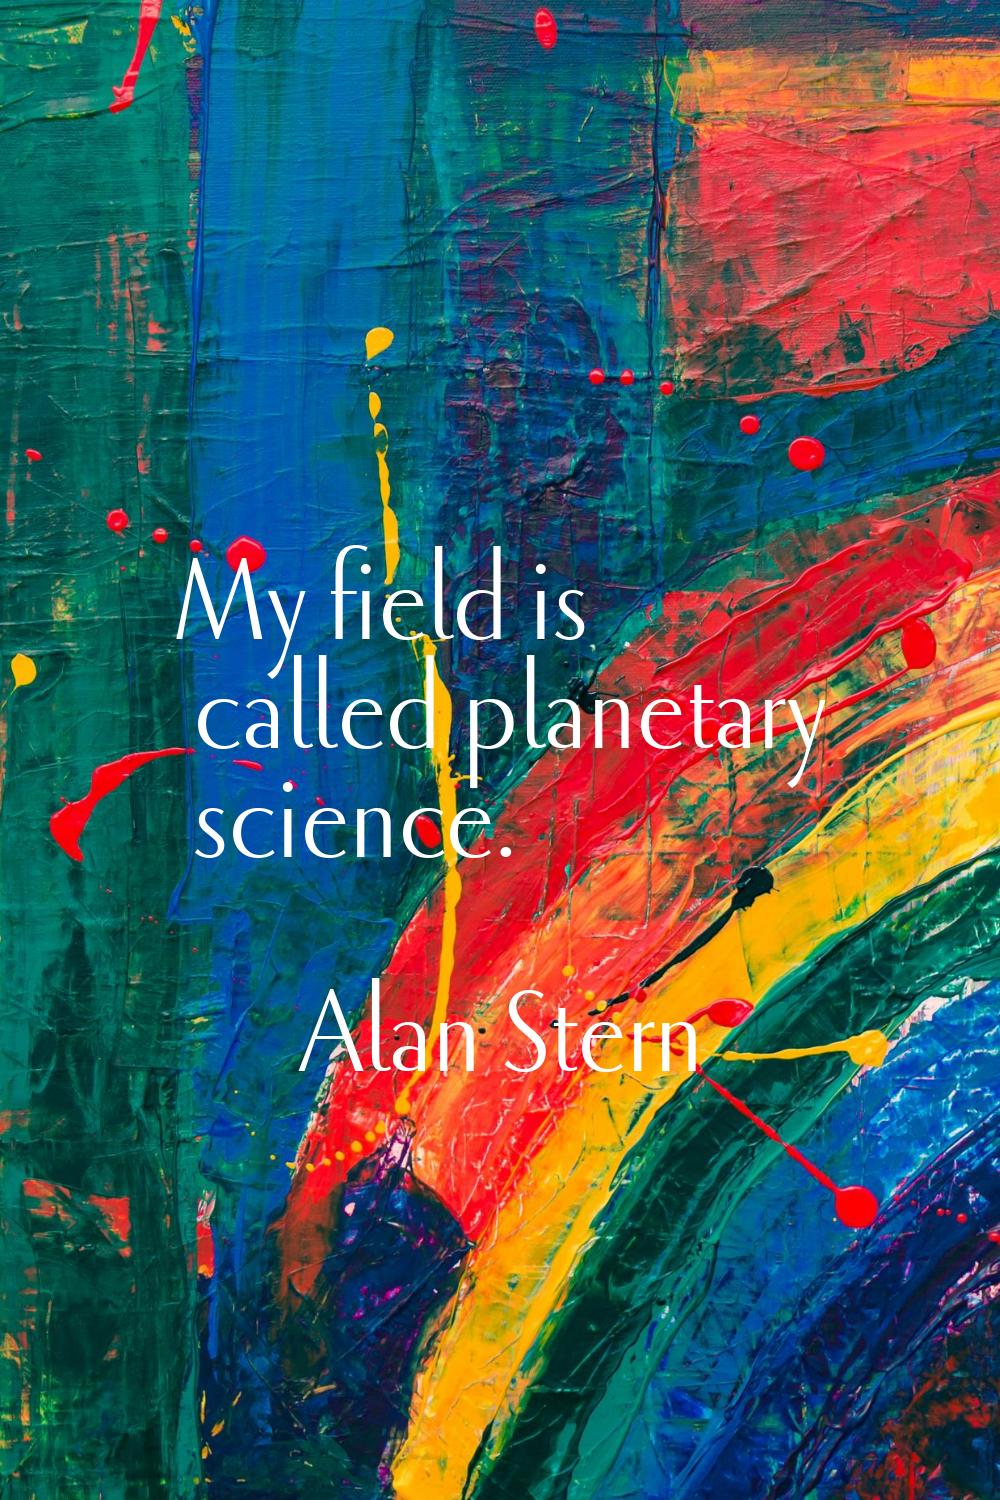 My field is called planetary science.